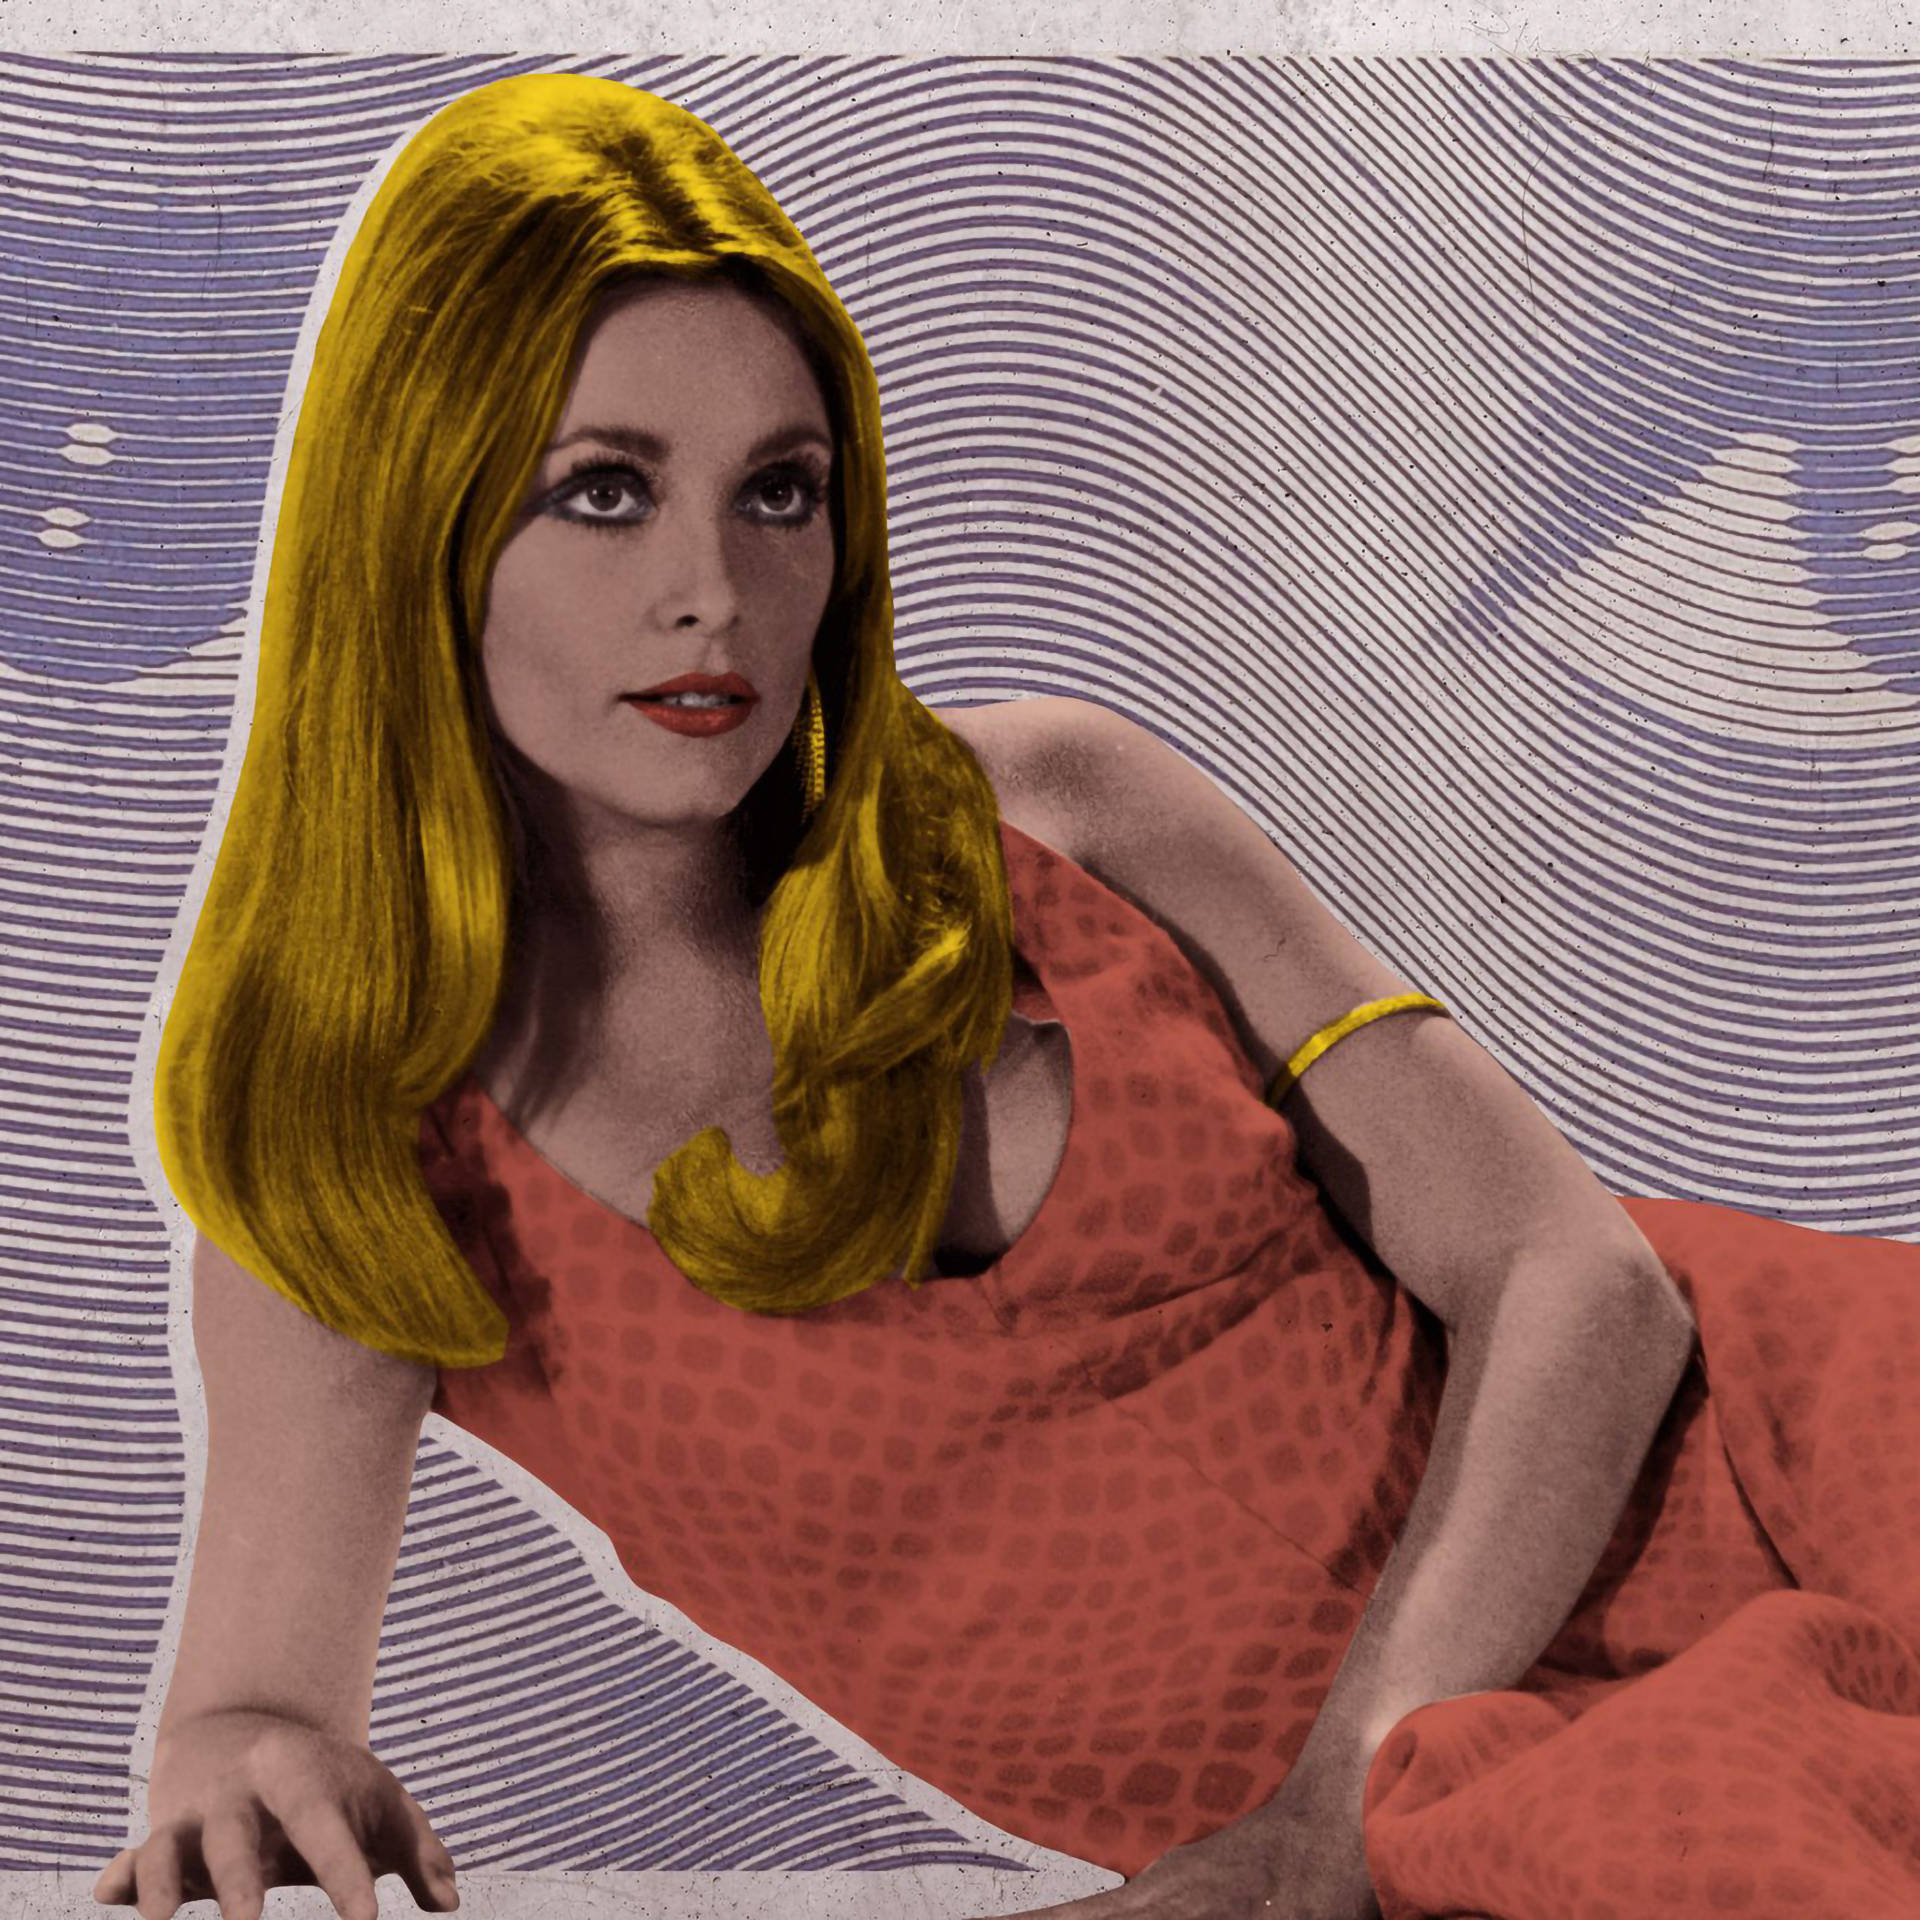 Sharontate Pop Art Aesthetic Would Be Translated To 